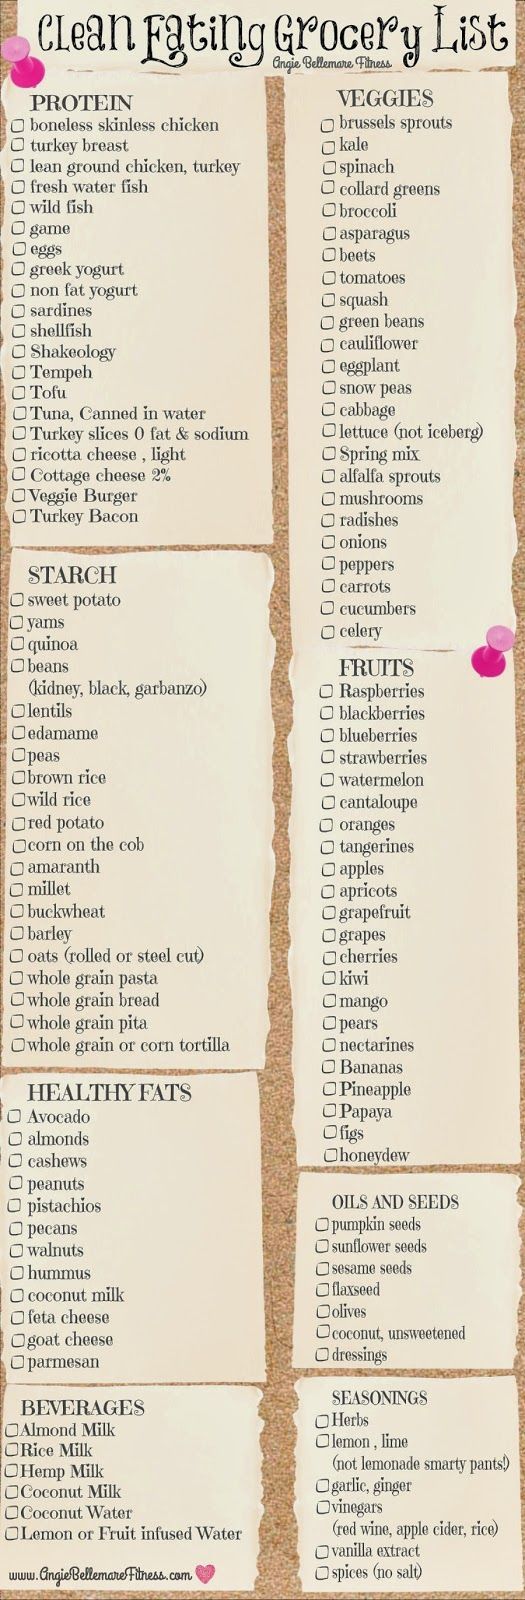 7 Day Grocery List